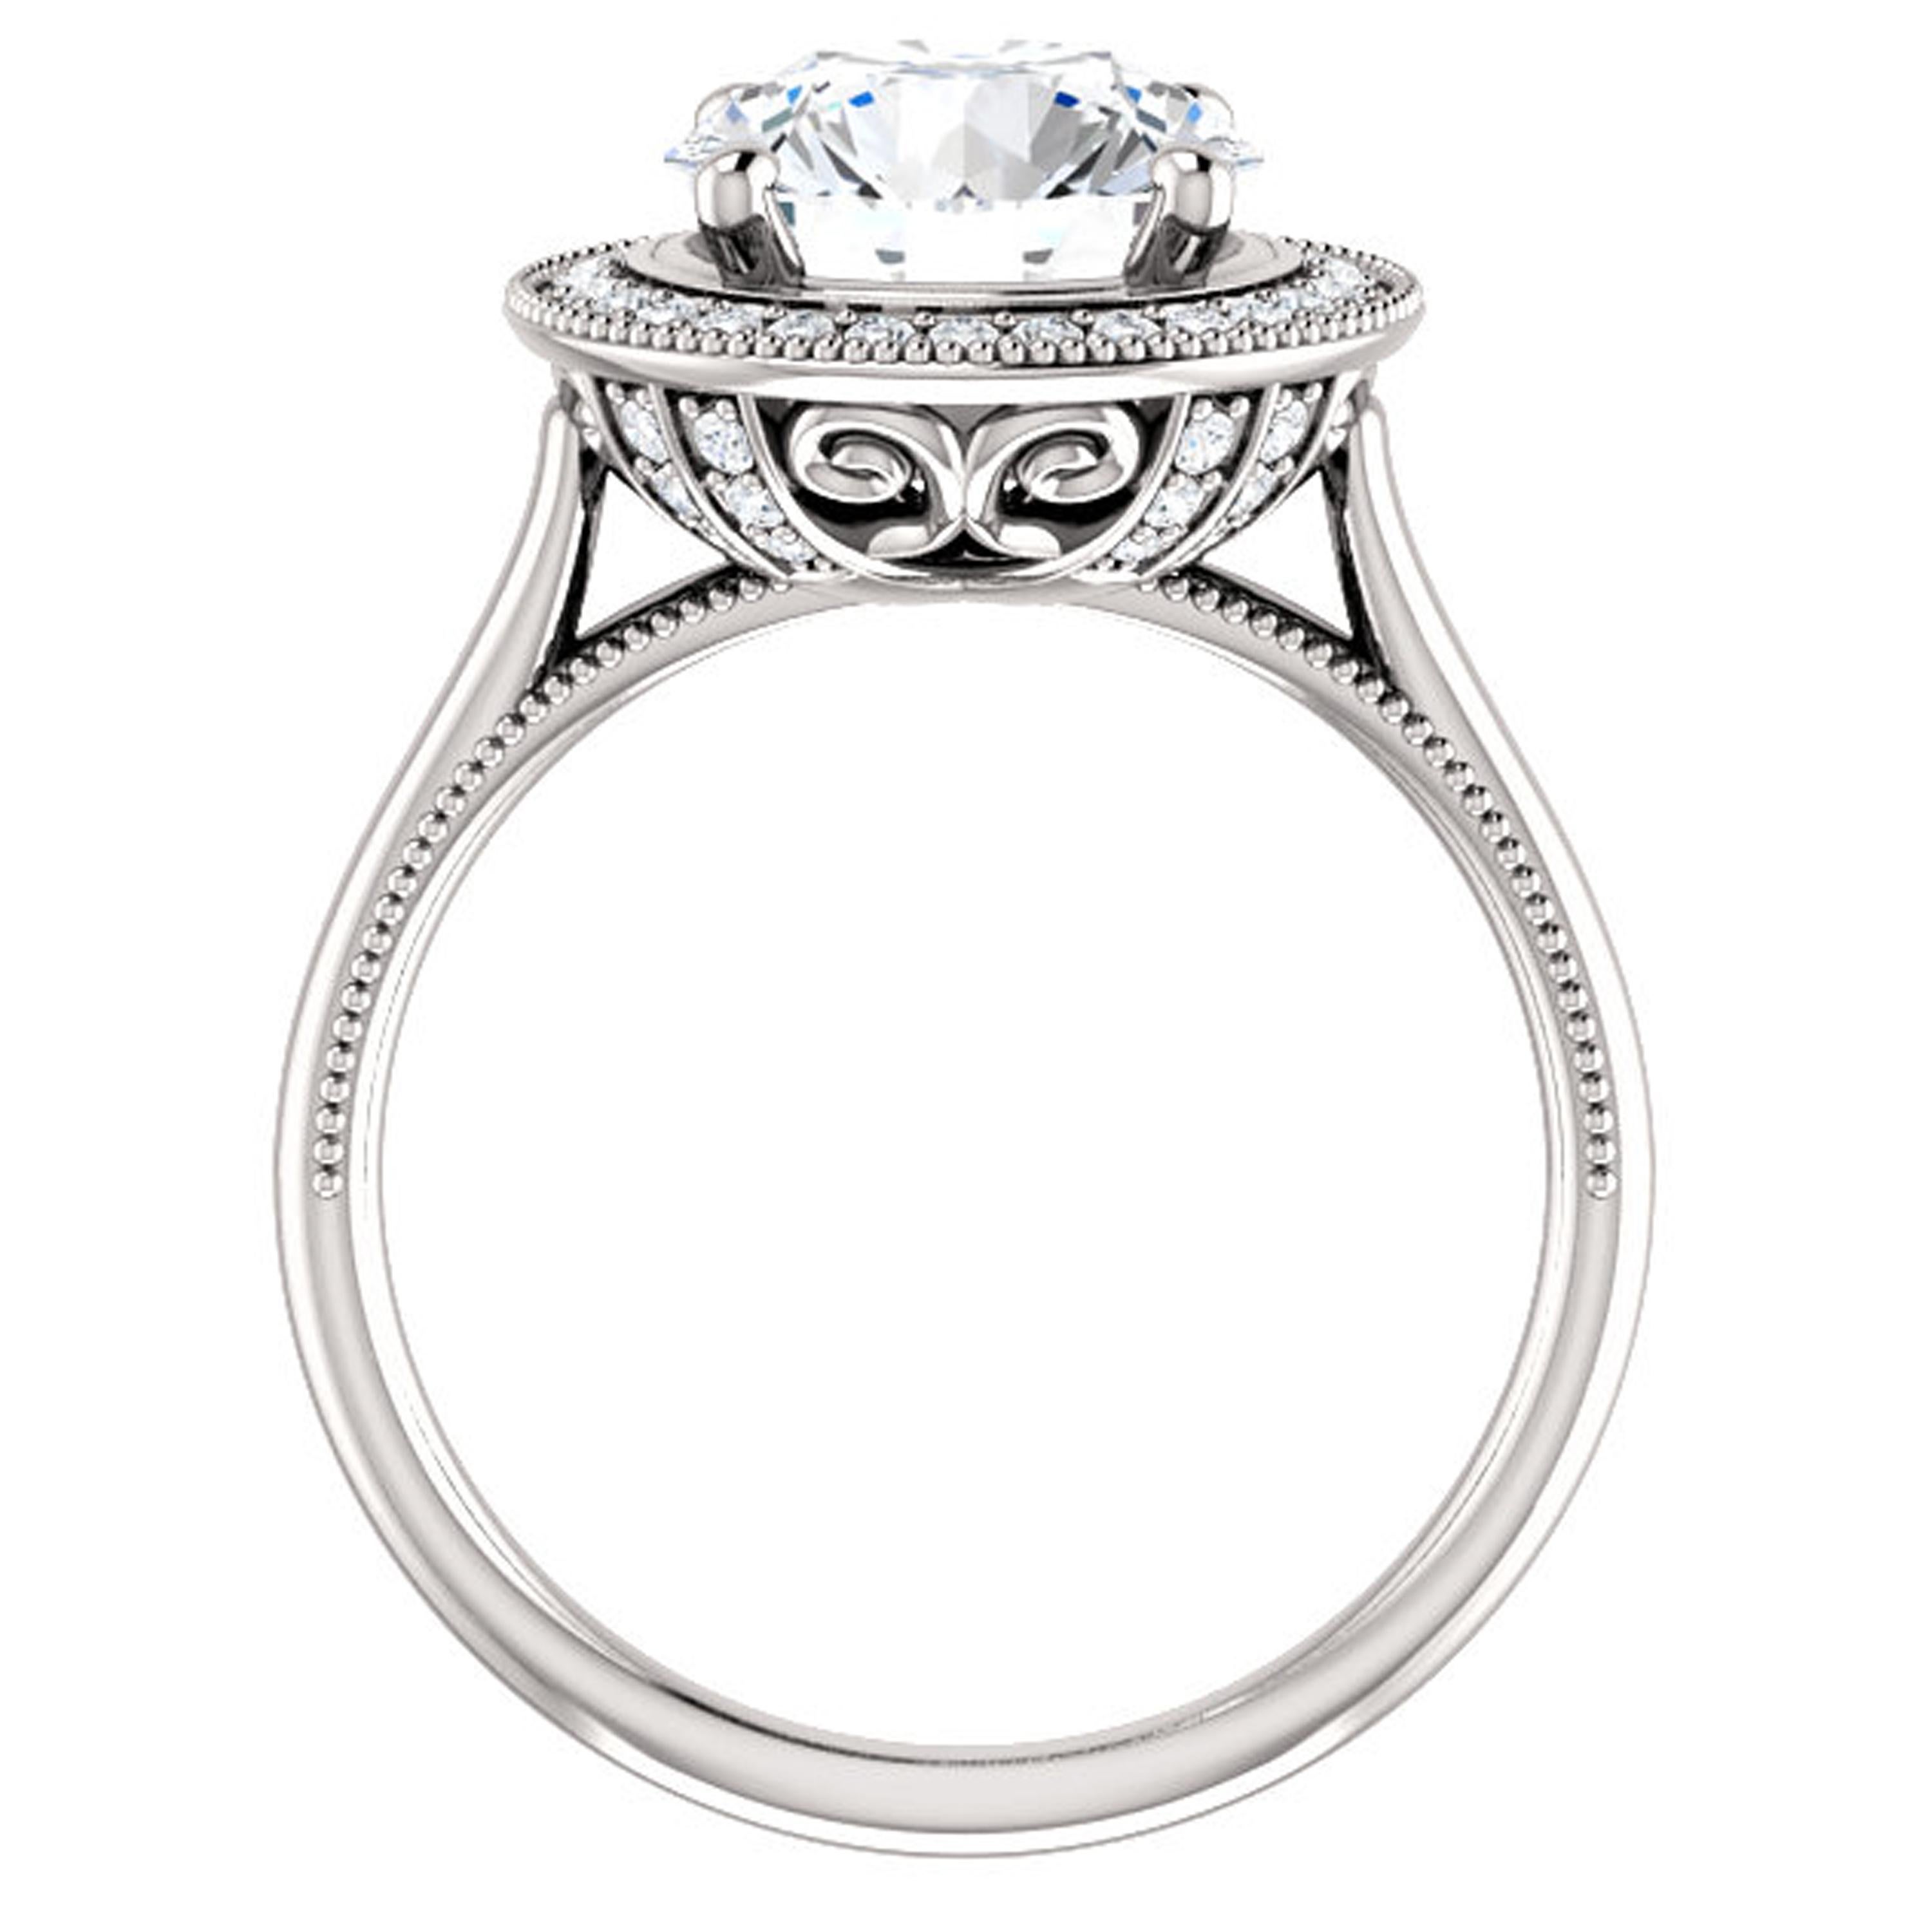 Inspired by the Victorian era, intricate milgrain detailing adorns the shank and halo of this vintage style engagement ring. Shimmering white diamonds surround the halo and glorify the center. Beautiful filigrees and surprise diamonds decorate the